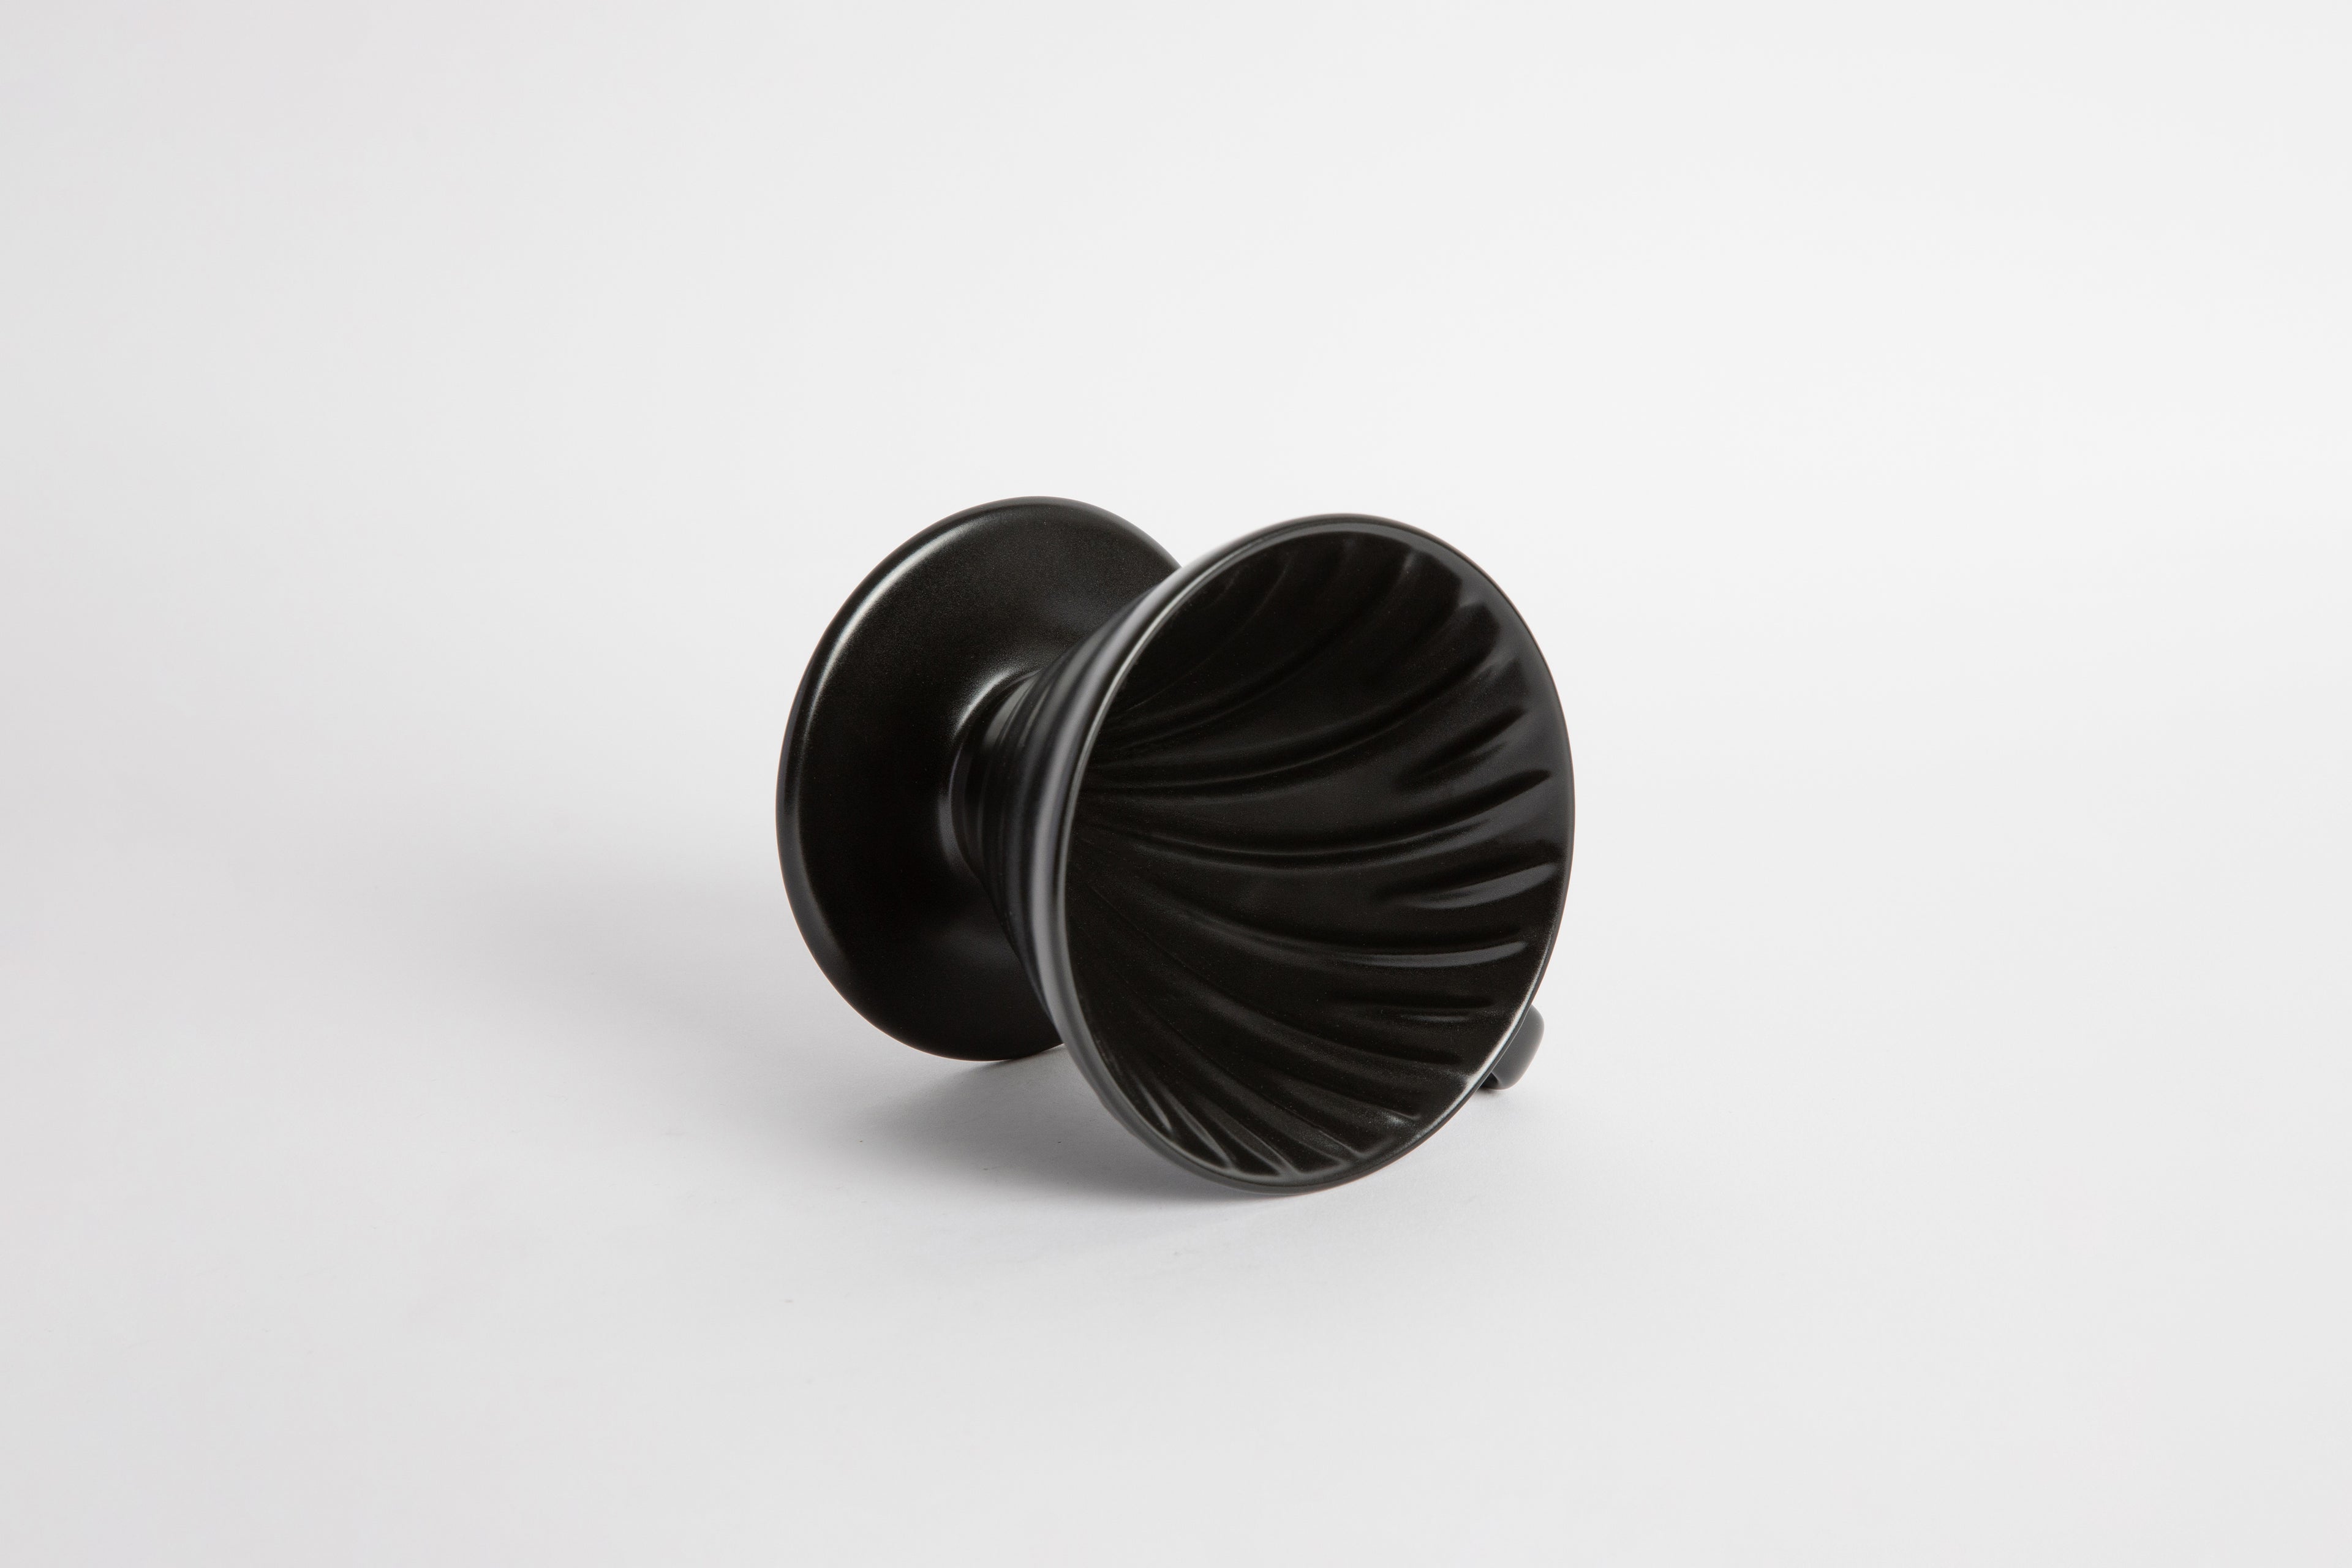 Black colored 60 degree cone shaped ceramic coffee dripper with handle and round base. Spiral ribbed on the inside cone. Set on white background